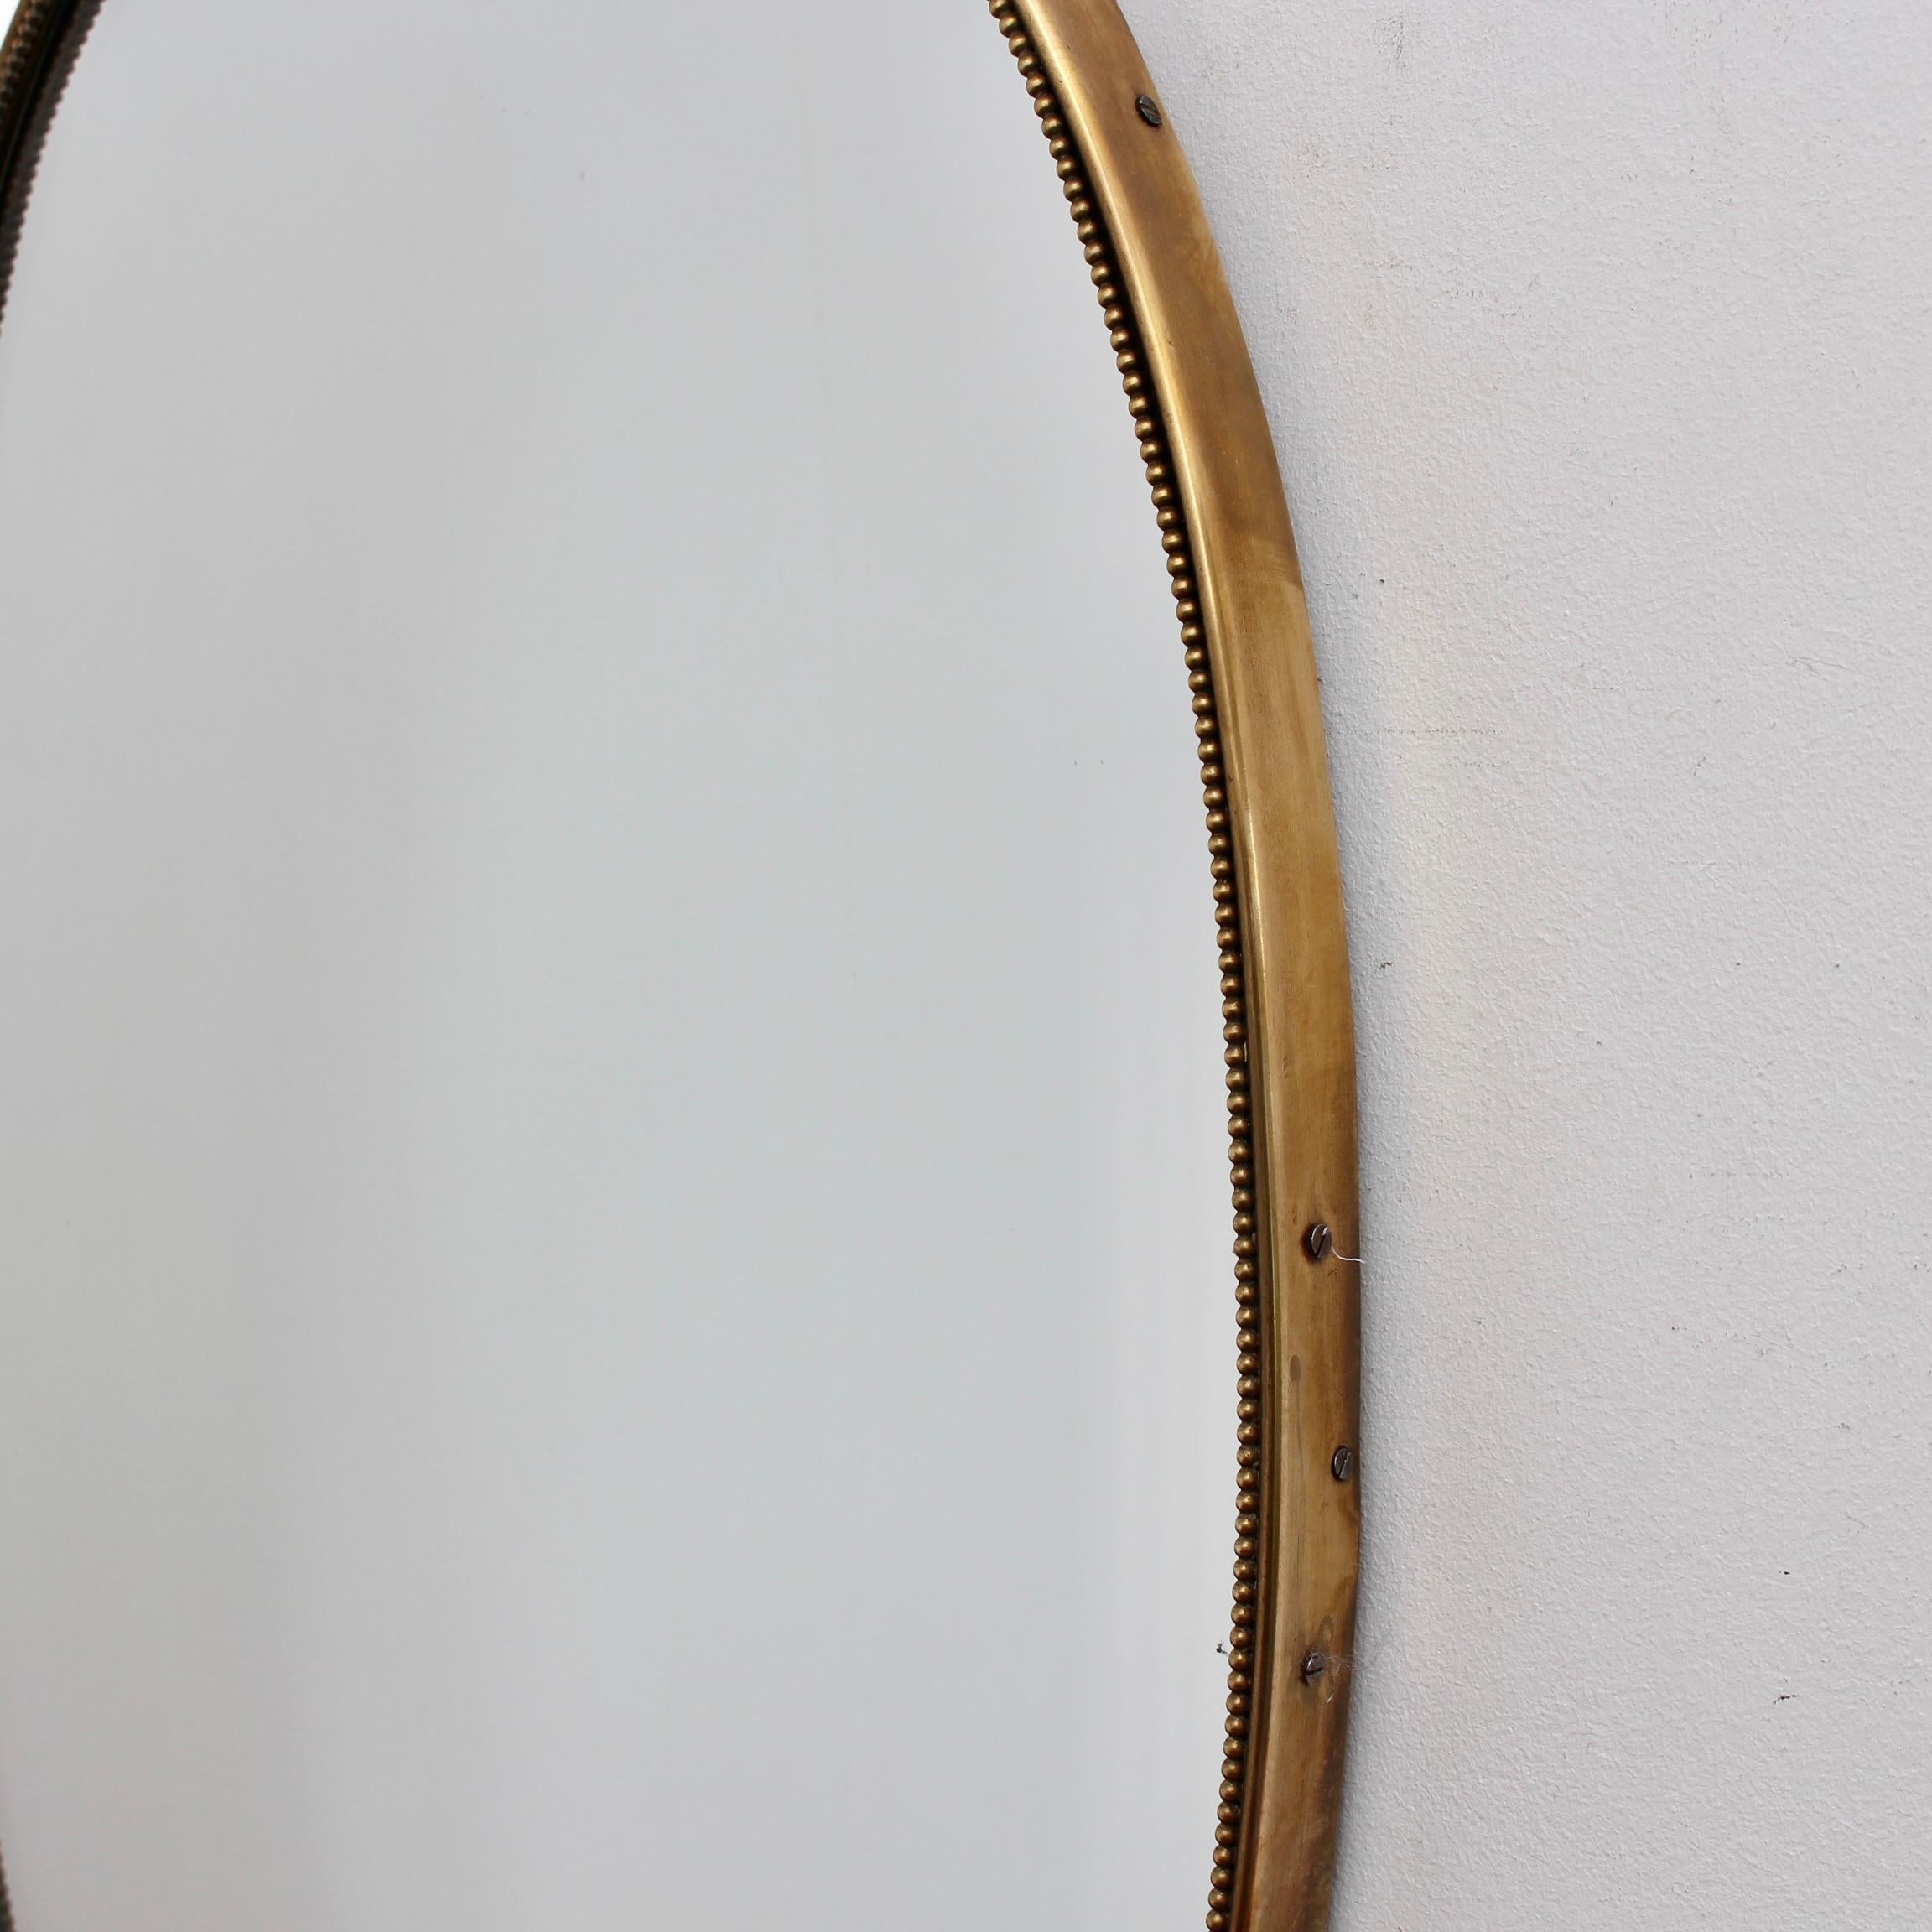 Vintage Italian Oval Wall Mirror with Brass Frame and Beading (circa 1950s) For Sale 4